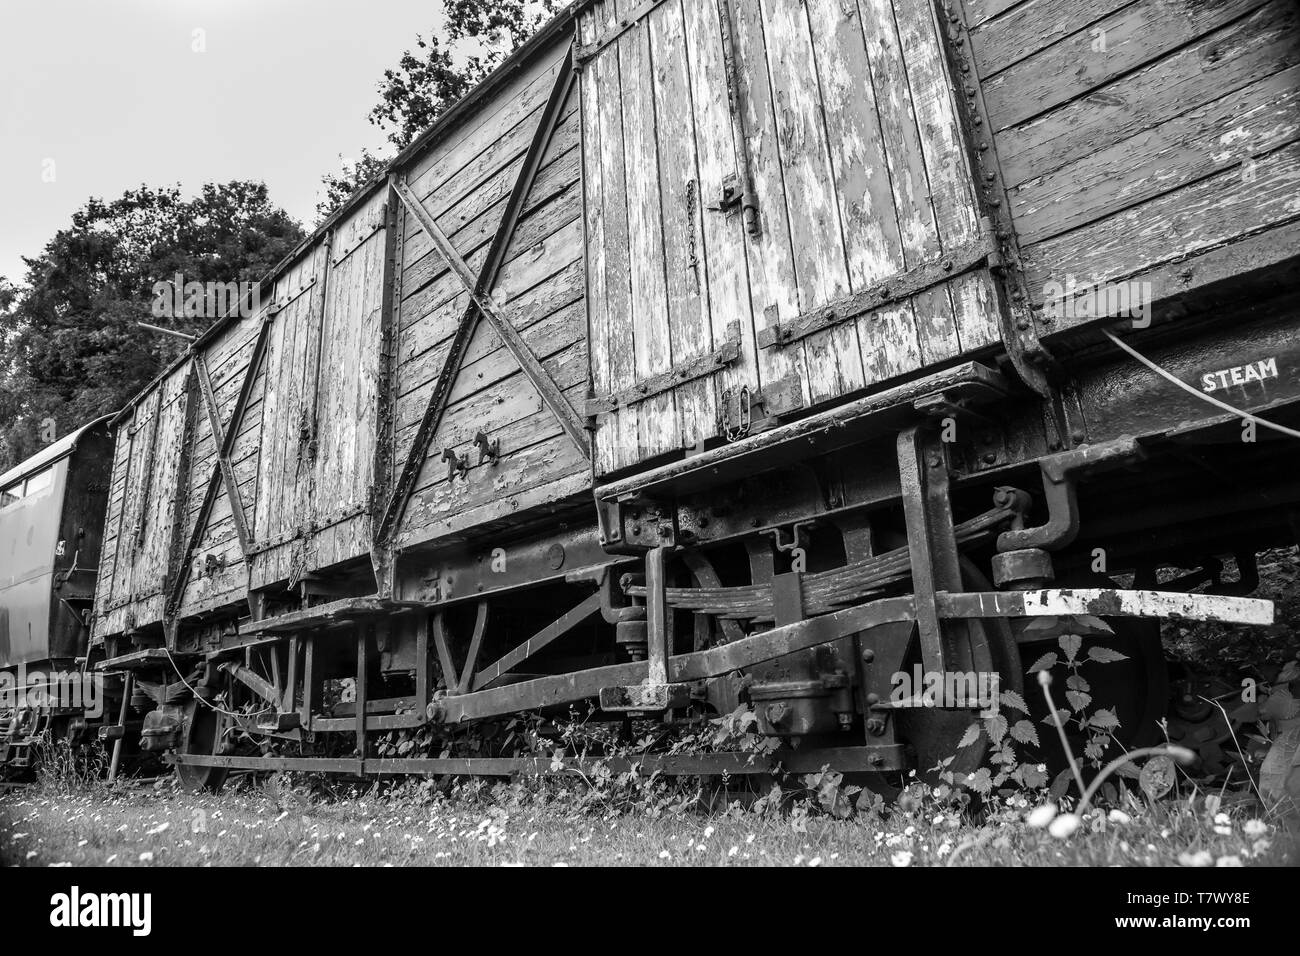 Black & white close up of disused, old, vintage railway carriage used for transportation of freight. Stock Photo